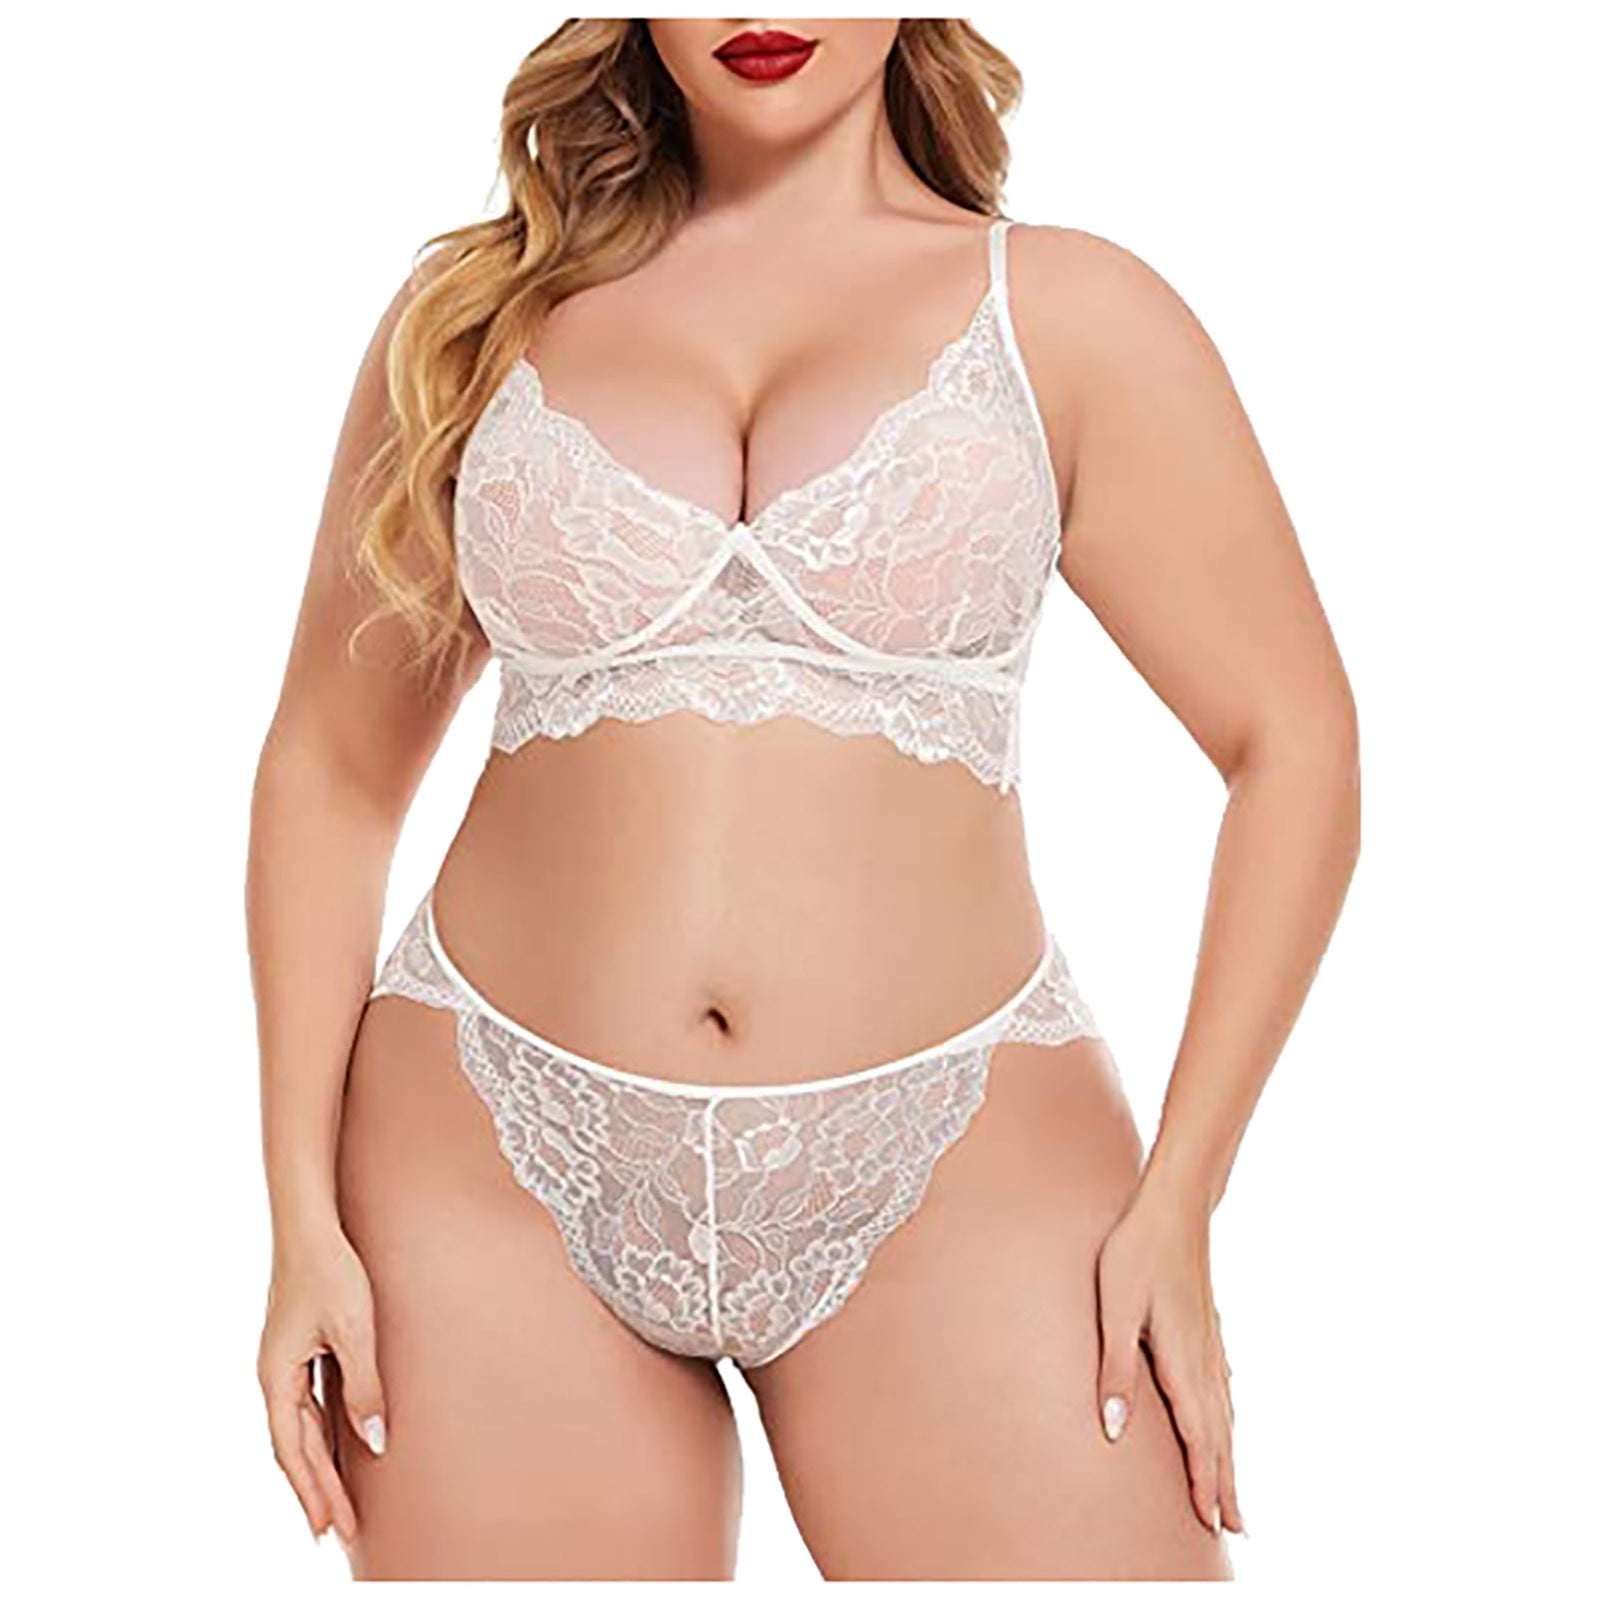 Oem Plus Size Underwear Women's Sexy Lingerie High Quality Lace Bra And Panty  Sets, Plus Size Lingerie For Women, Women's Lingerie, Bra And Brief Sets -  Buy China Wholesale Plus Size Underwear